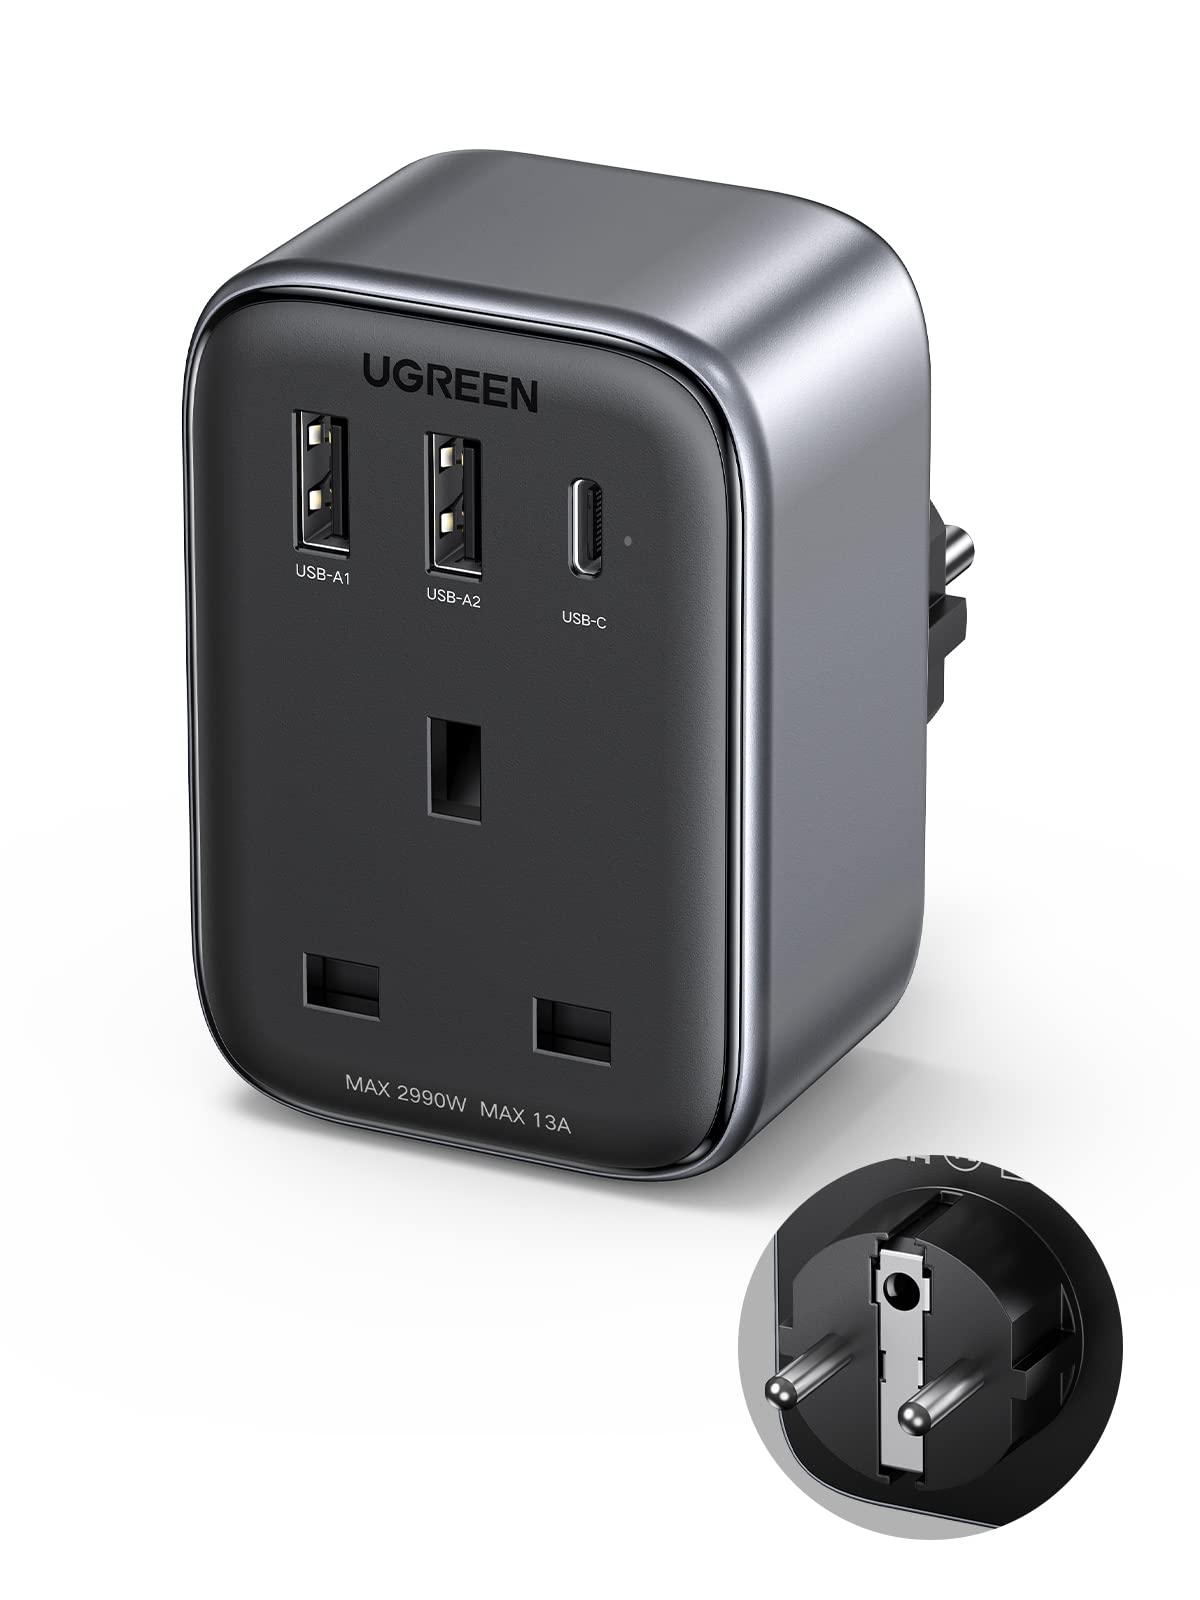 Ugreen UK To European Plug Adapter PD 30W Travel Adapter With USB C GaN Fast 4-In-1